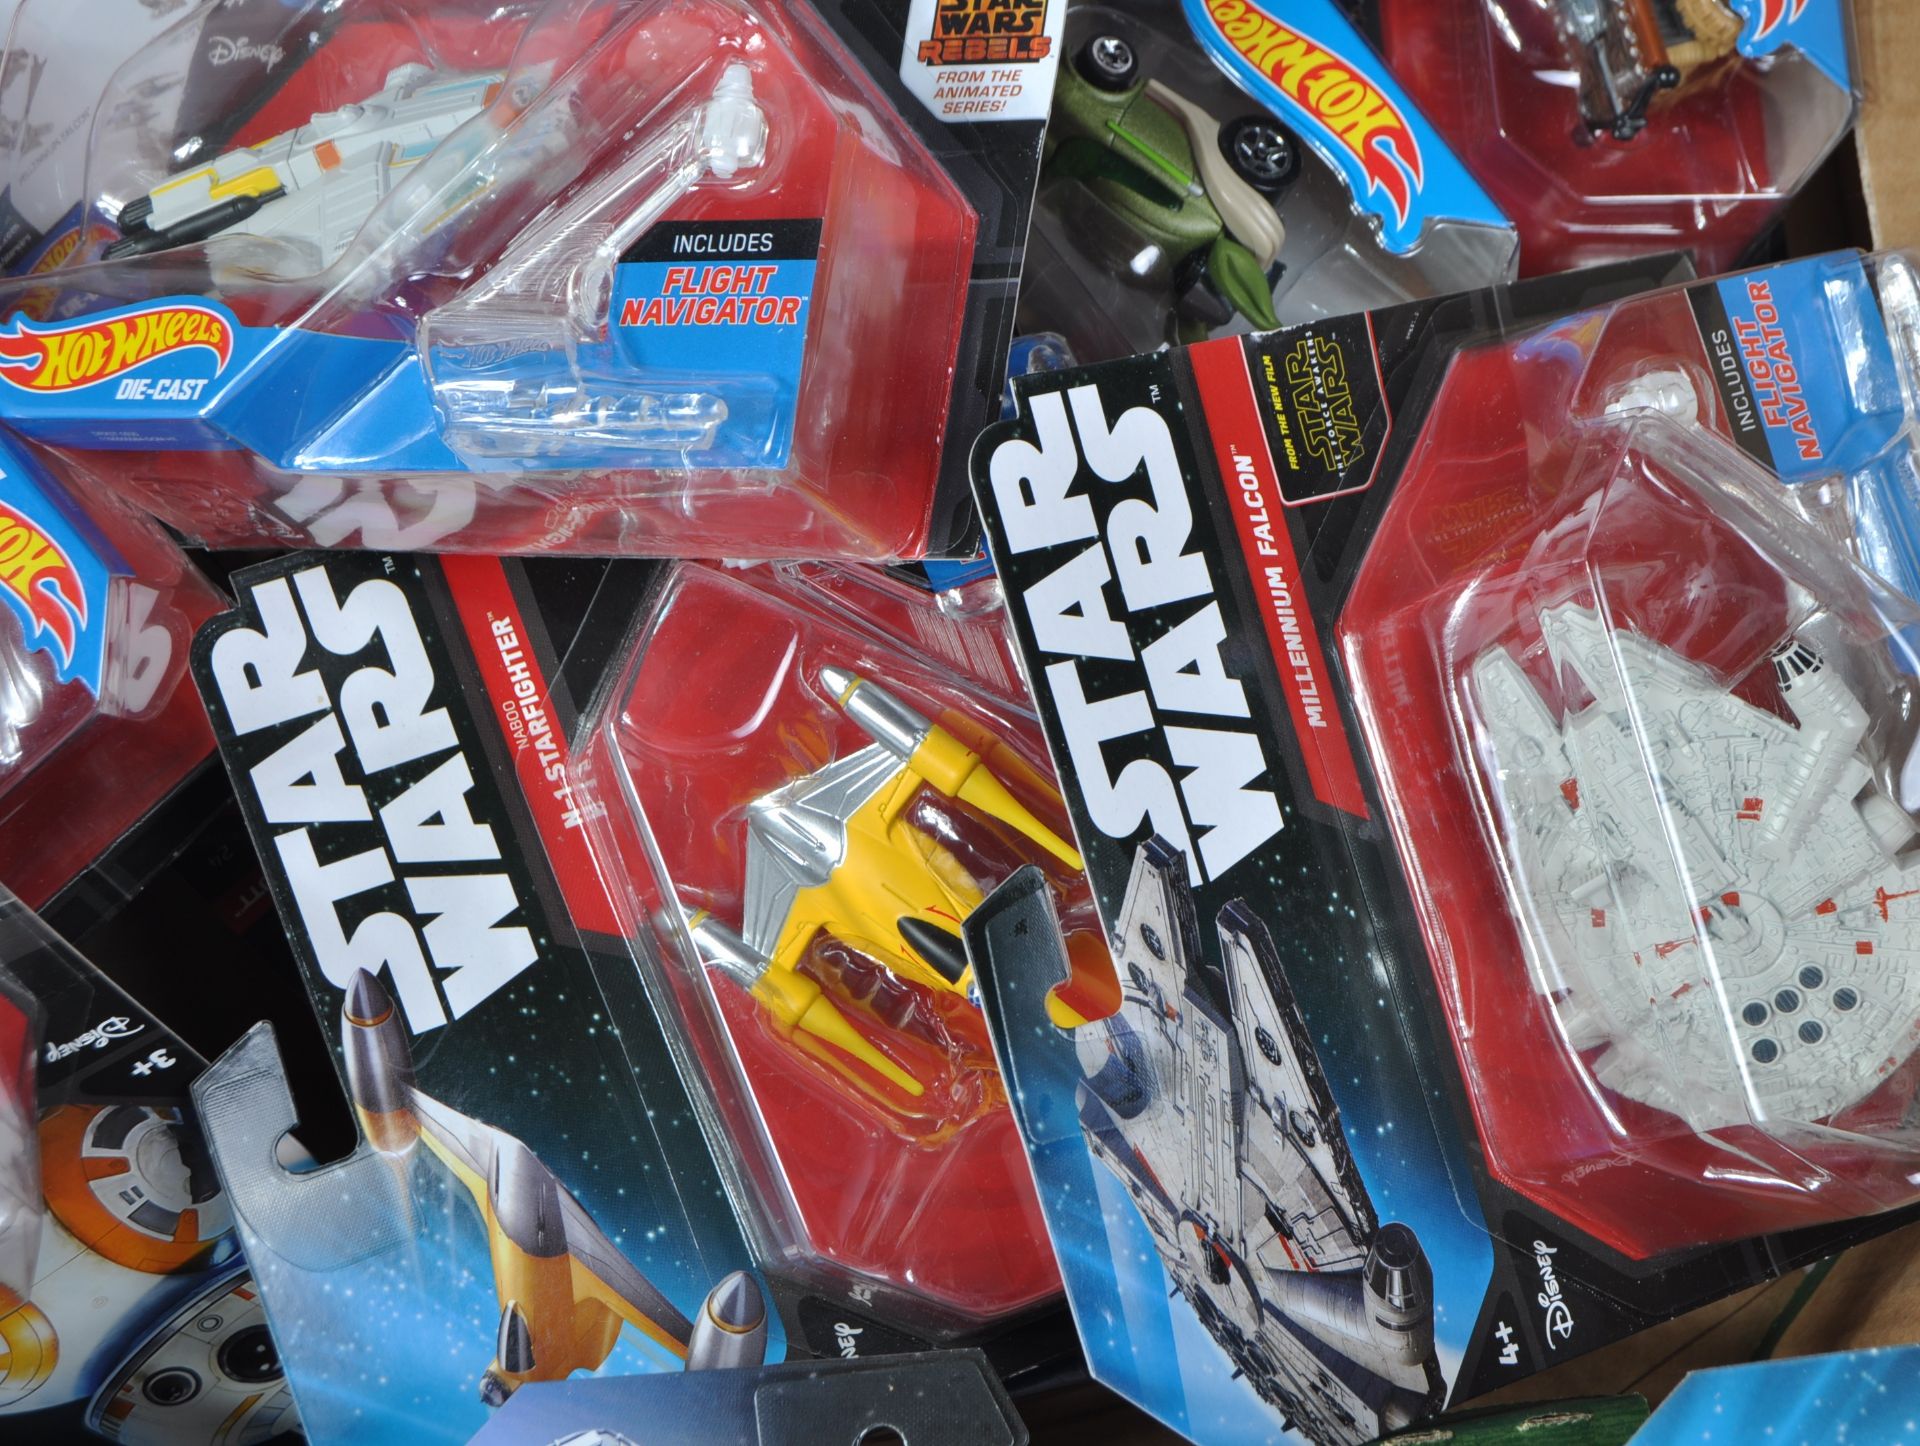 COLLECTION OF STAR WARS HOT WHEELS DIECAST MODEL CARS & PLANES - Image 5 of 6